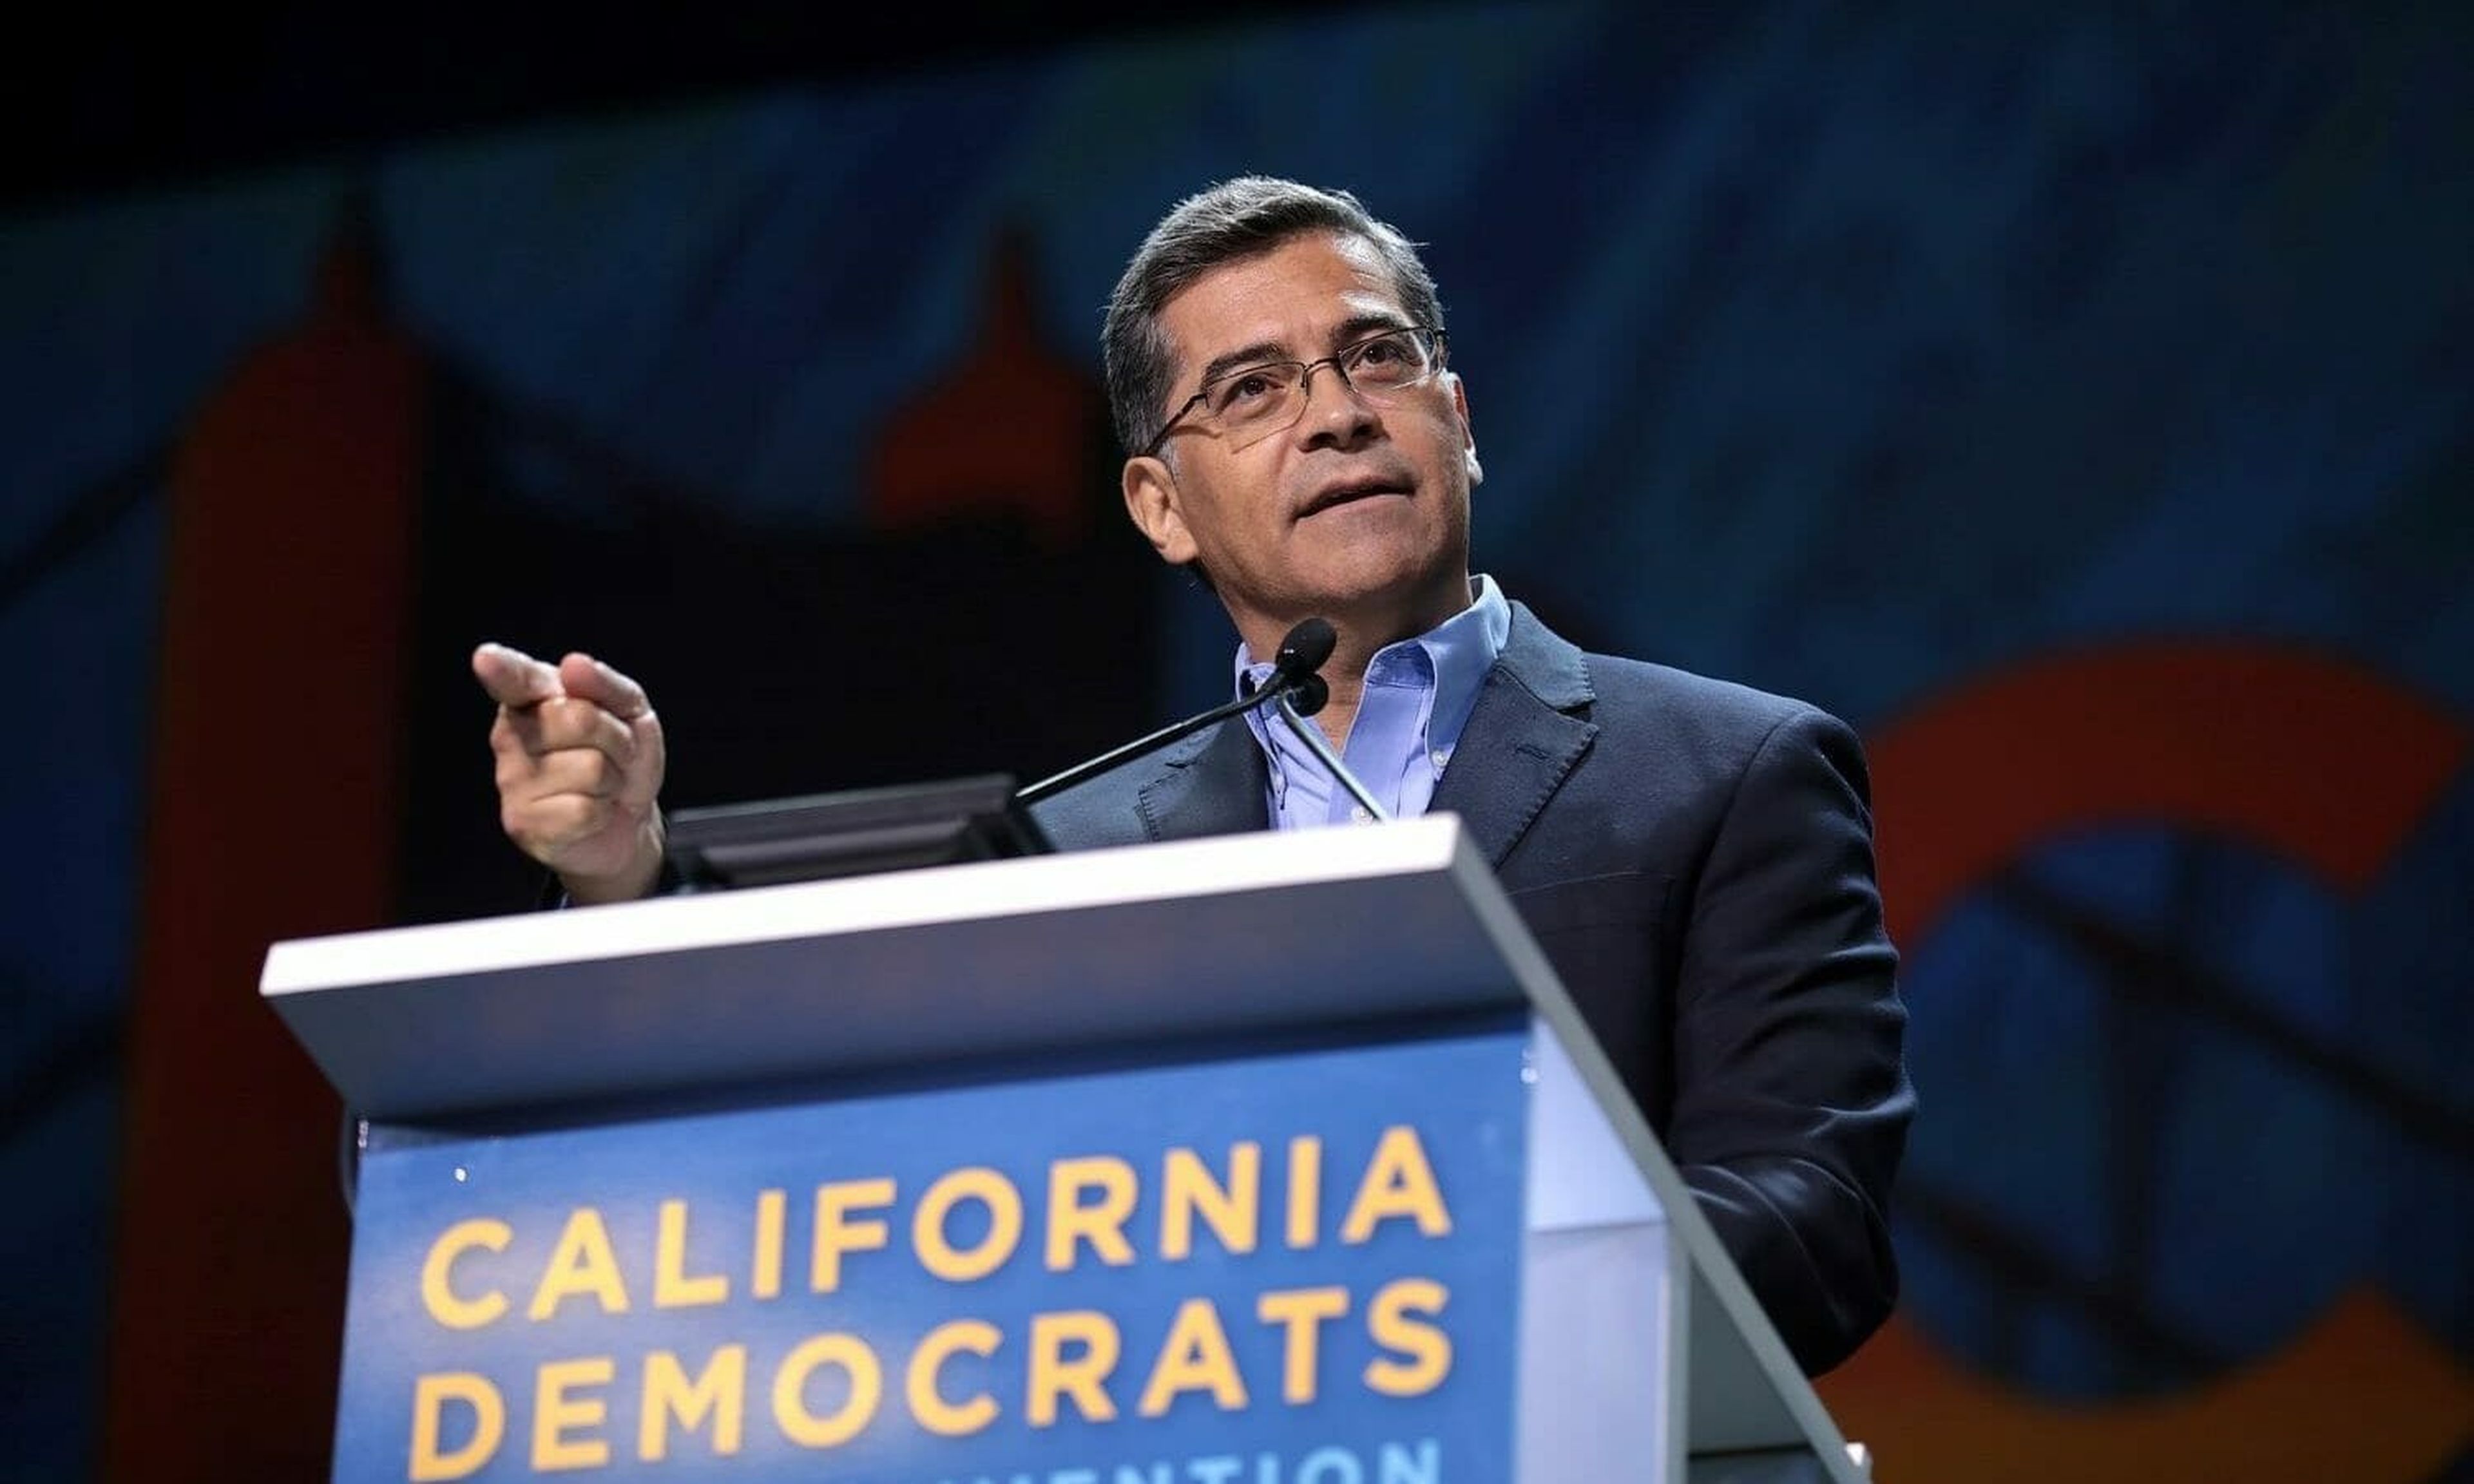 California Attorney General Xavier Becerra speaking at the 2019 California Democratic Party State Convention in San Francisco, California. (CC BY-SA 2.0)